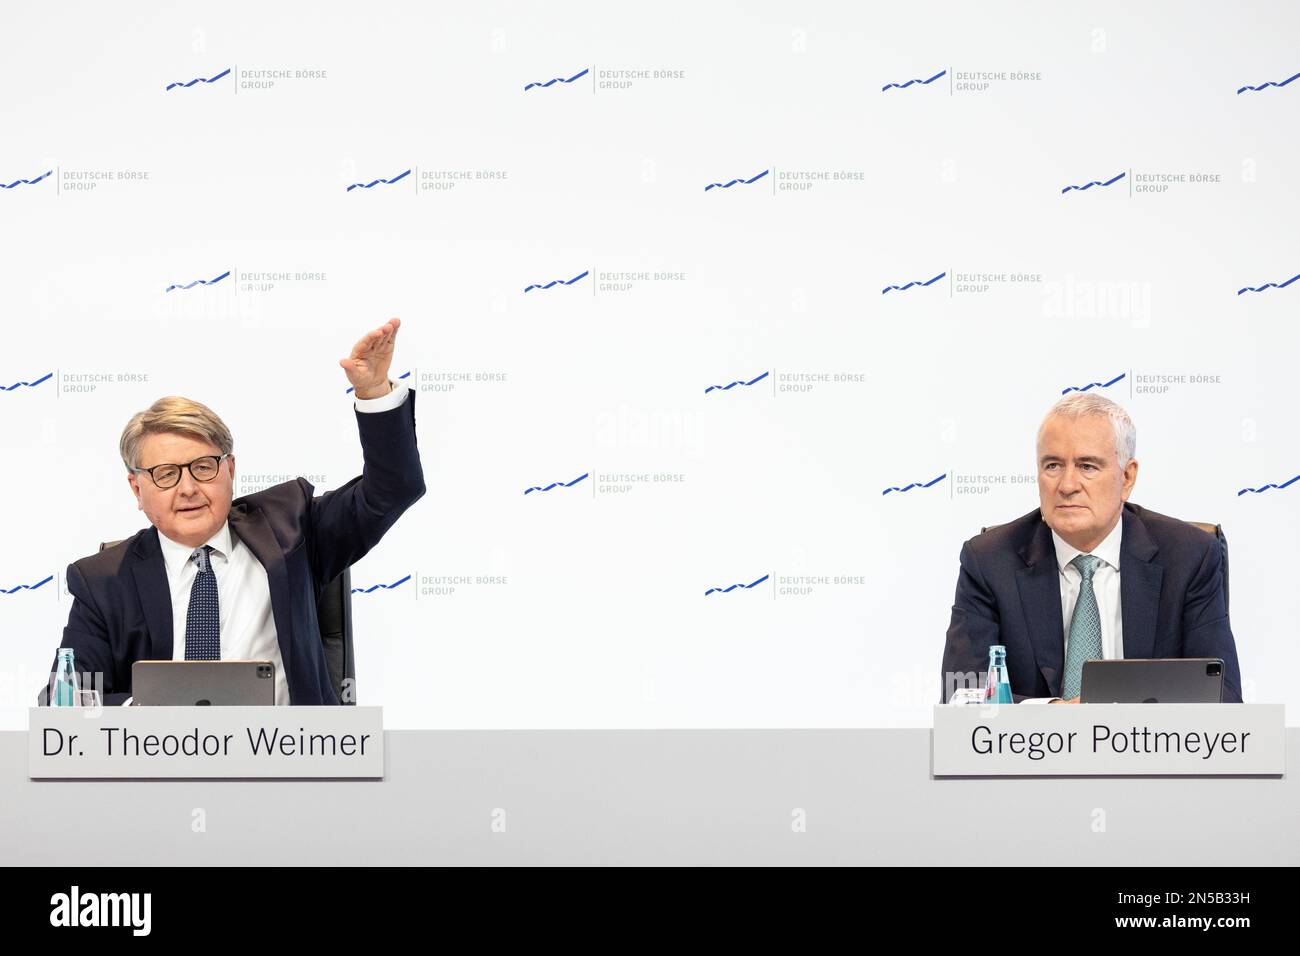 09 February 2023, Hesse, Frankfurt/Main: Theodor Weimer, CEO of Deutsche Börse AG (l), and Gregor Pottmeyer, Executive Board member of Deutsche Börse AG (r), speak at the press conference. Deutsche Börse Group presents the figures for the financial year 2022 at the annual press conference. Photo: Hannes P. Albert/dpa Stock Photo